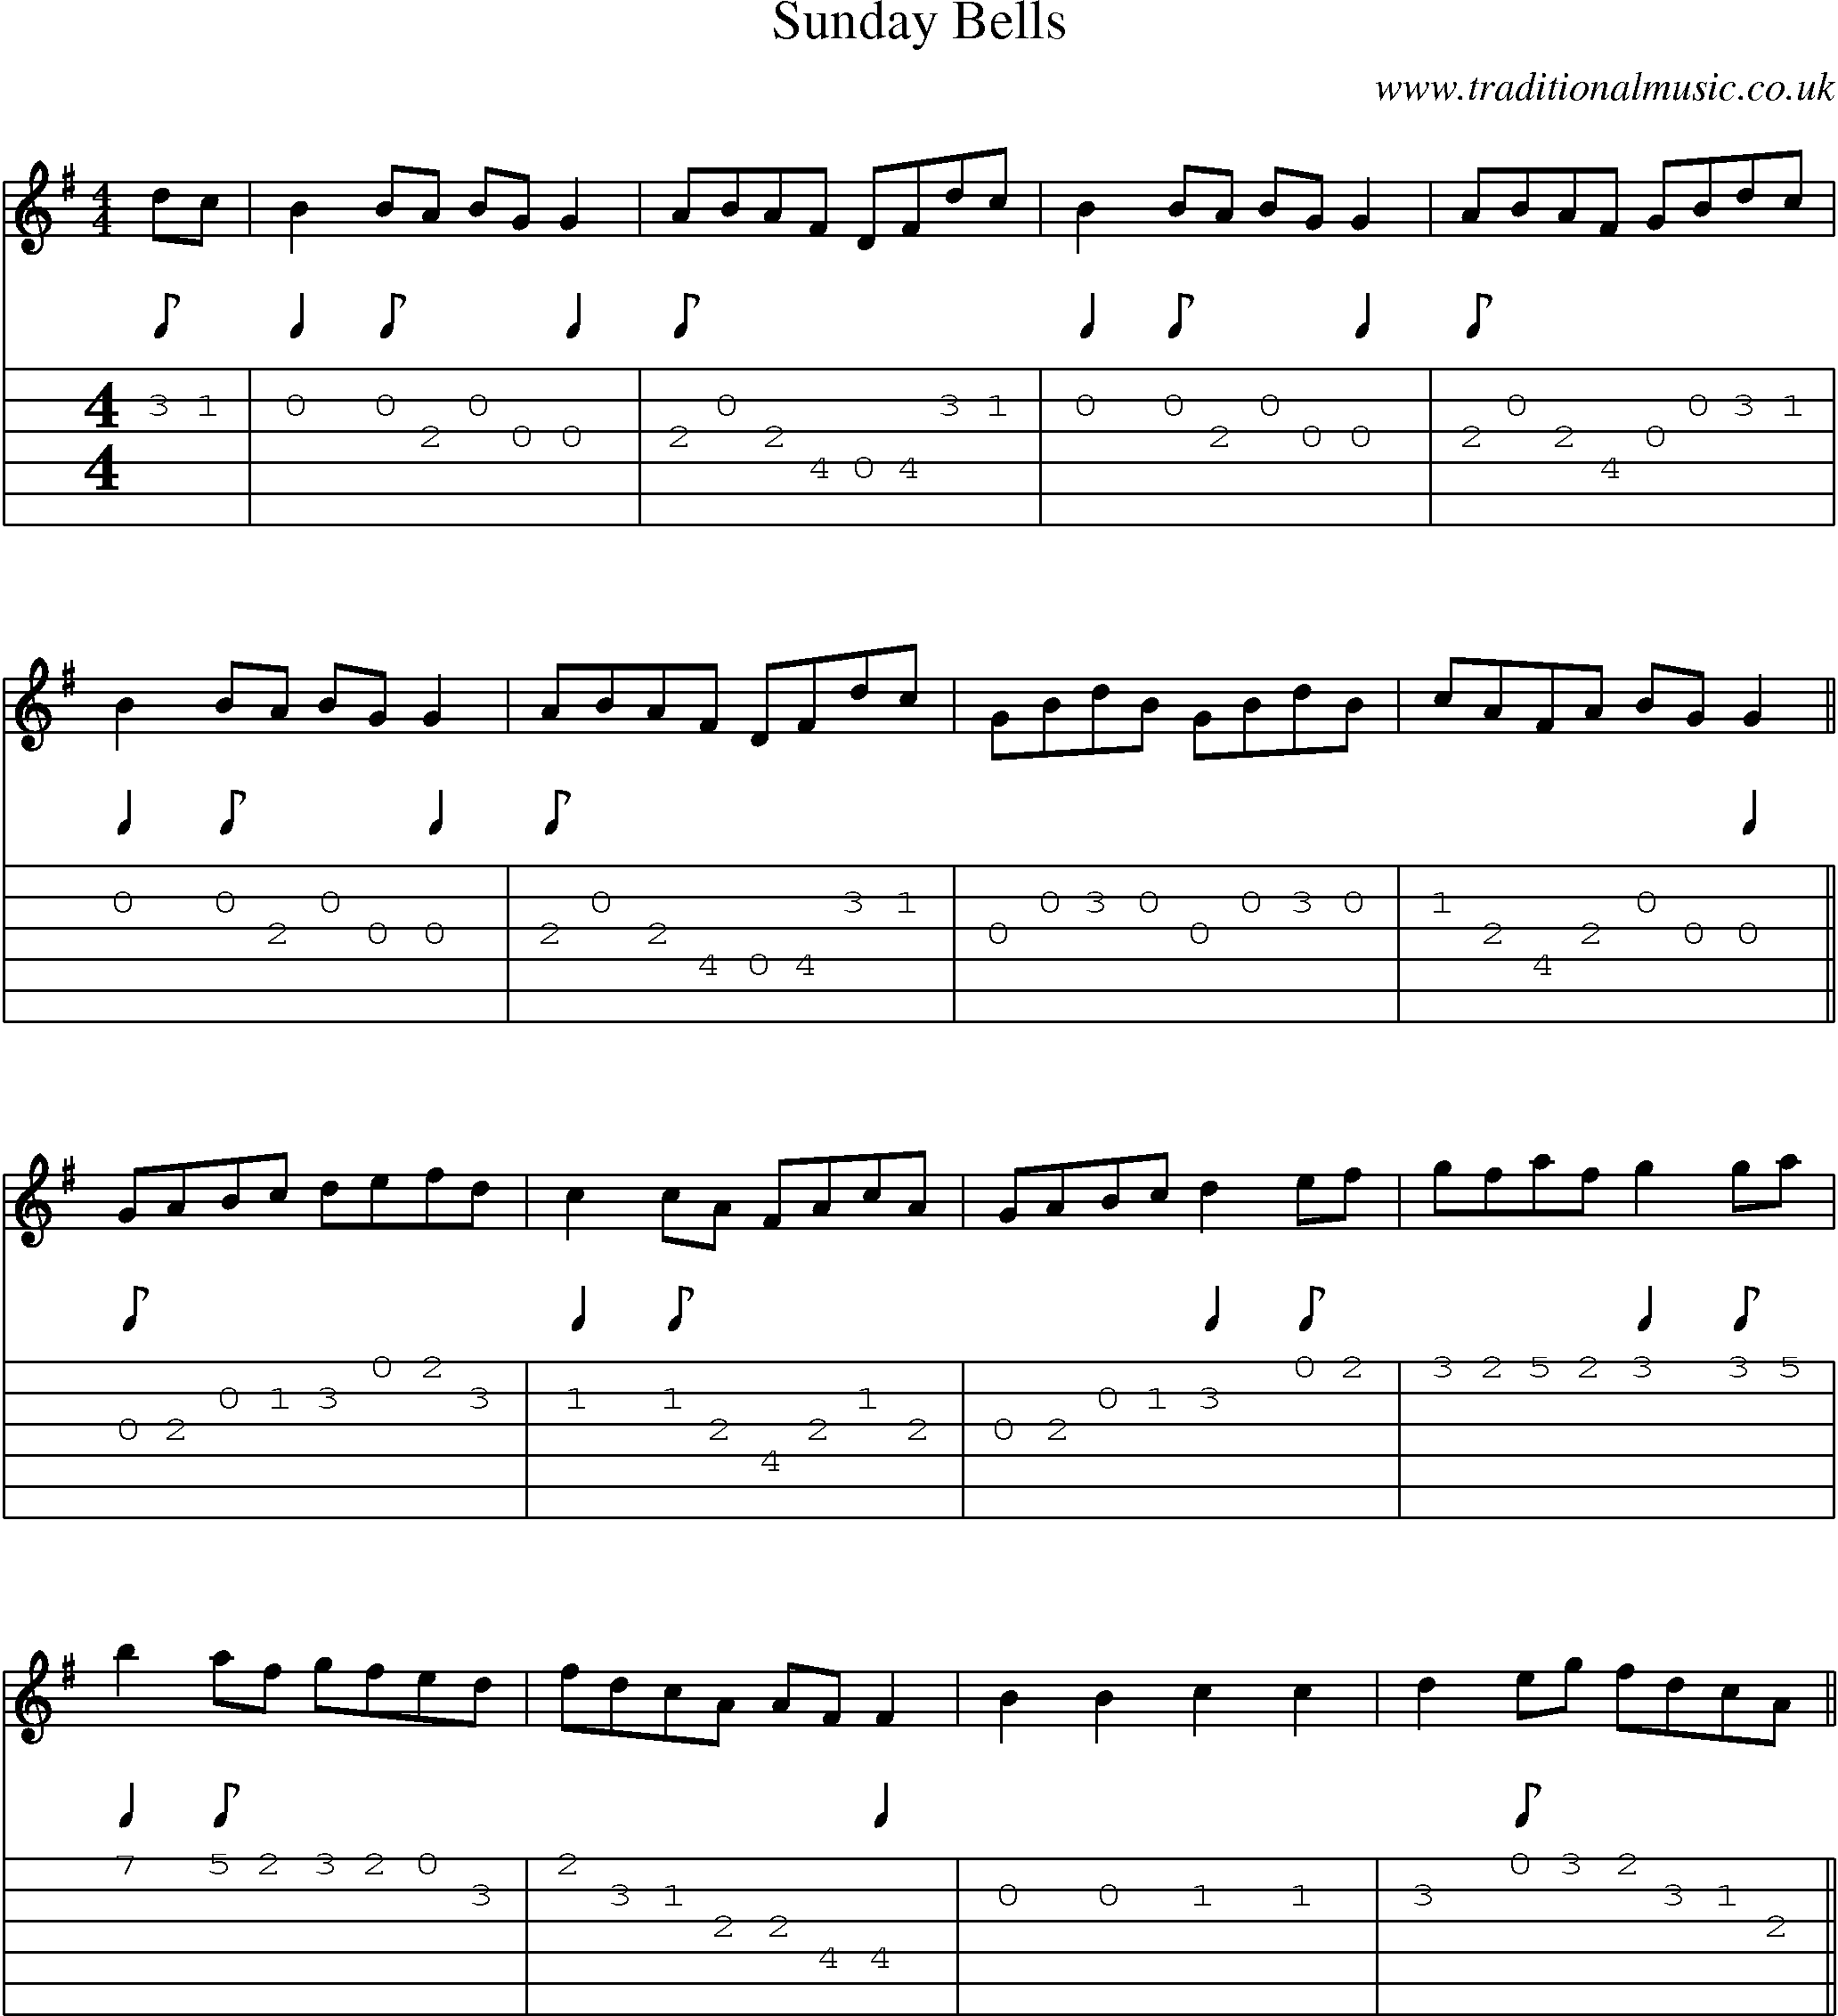 Music Score and Guitar Tabs for Sunday Bells